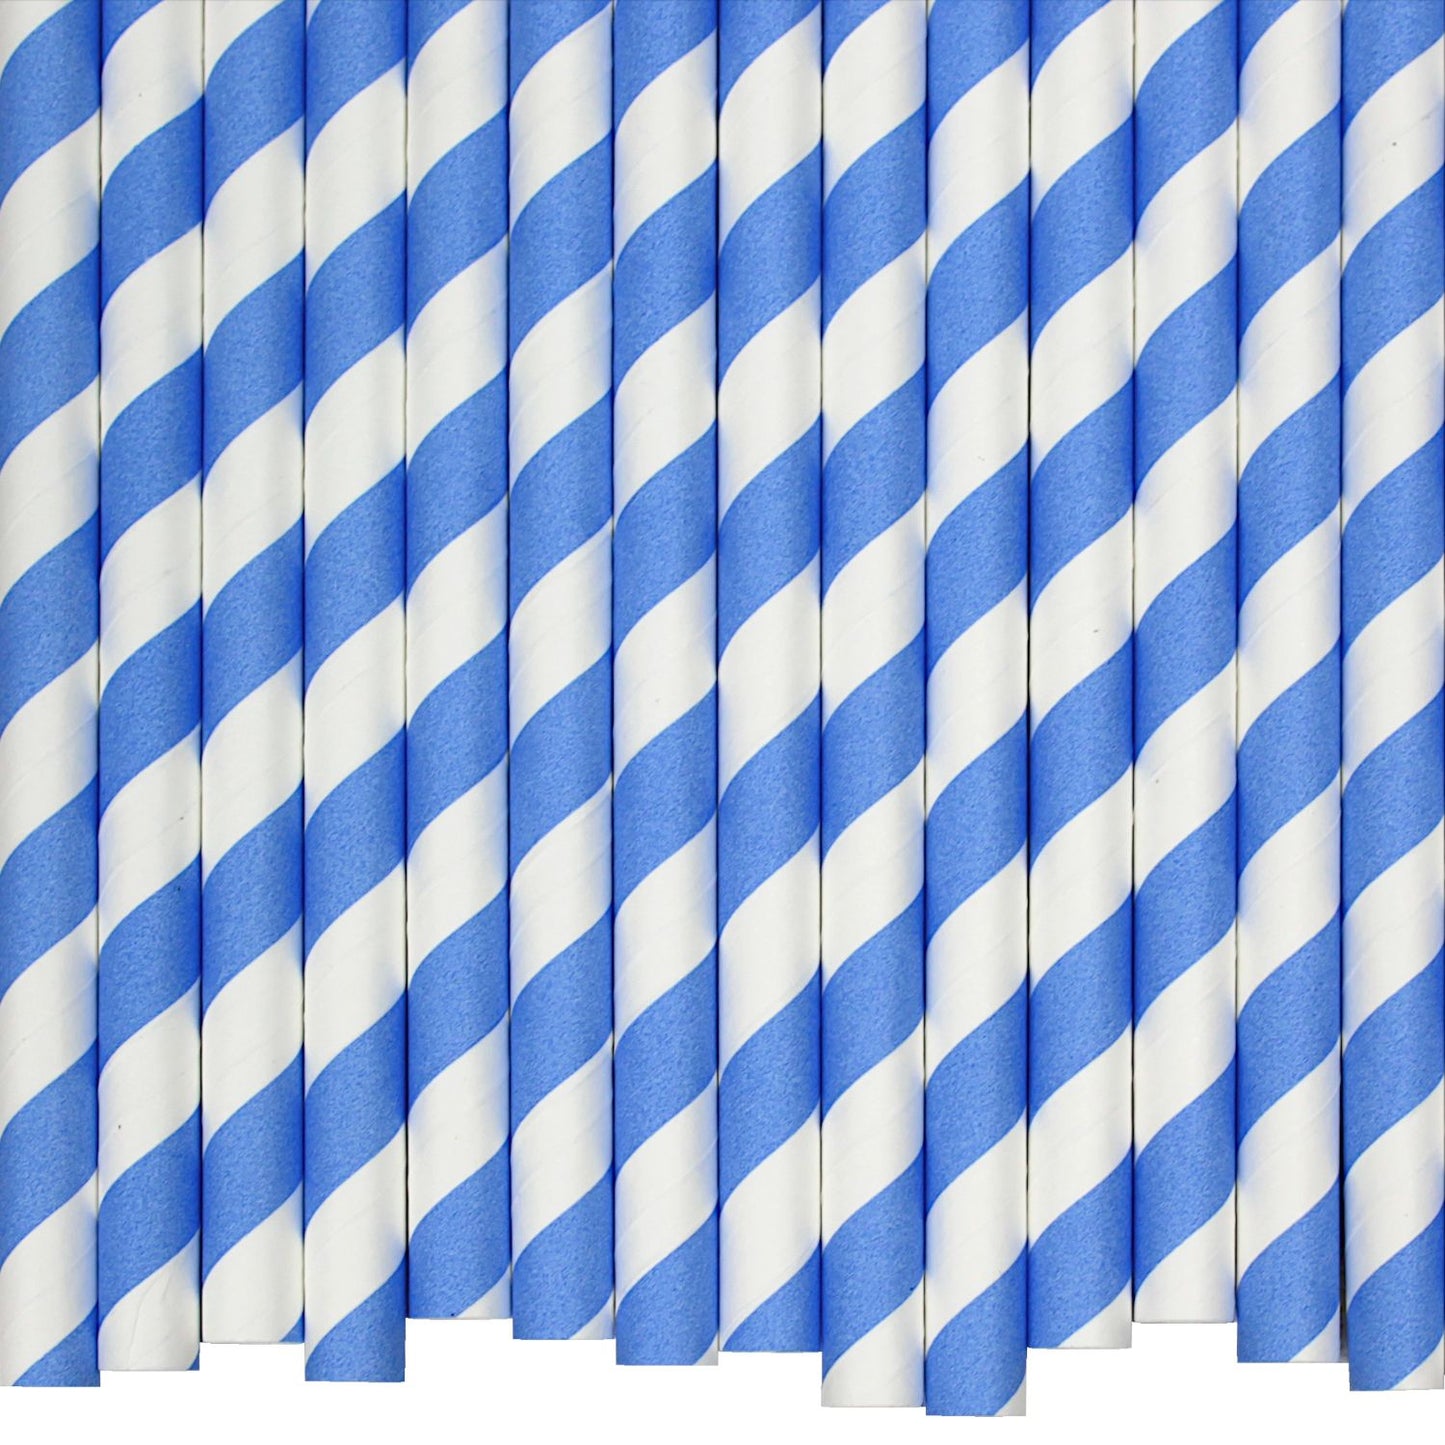 Blue & White Striped Paper Straws (10mm x 200mm) - Quality Drinking Straws for Smoothies and Milkshakes - Intrinsic Paper Straws